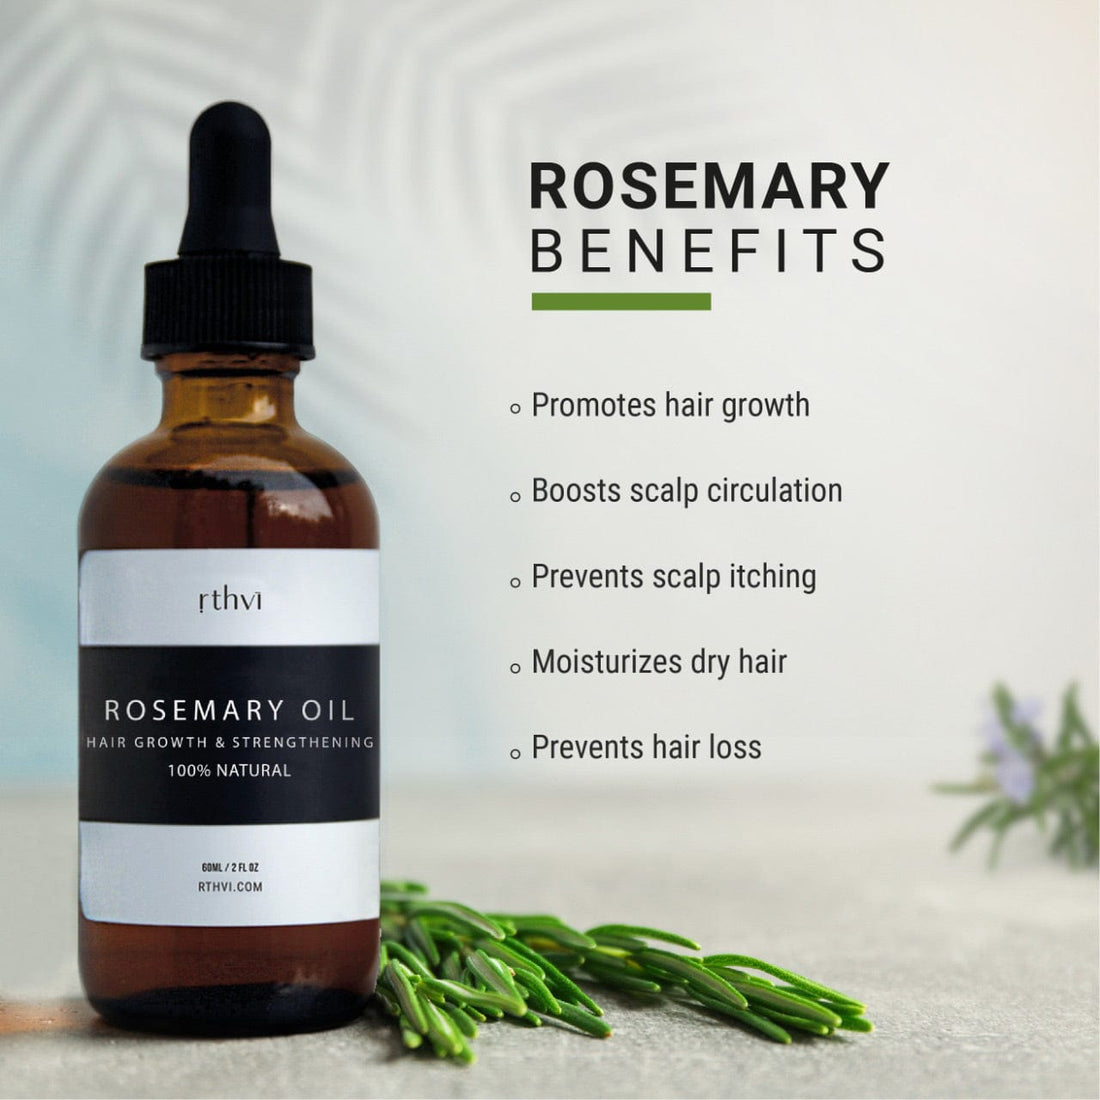 NOW Essential Oils, Rosemary Oil, 2-Ounce 2 Fl Oz (Pack of 1)